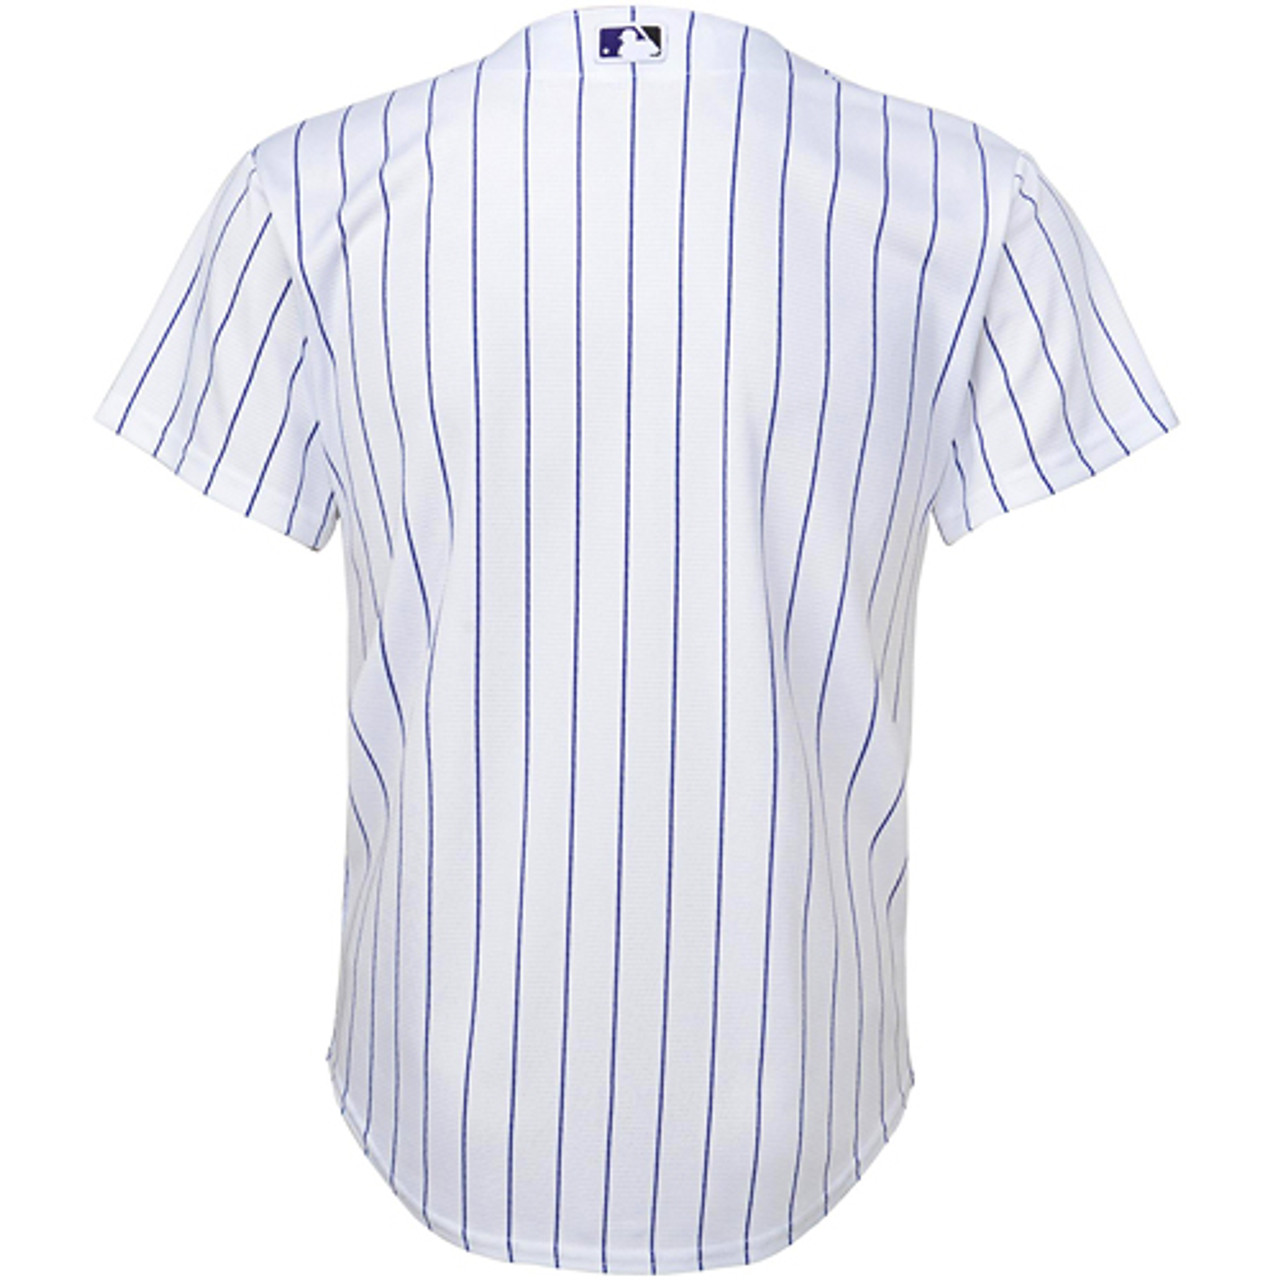 New York Yankees Majestic Youth Official Cool Base Jersey - White